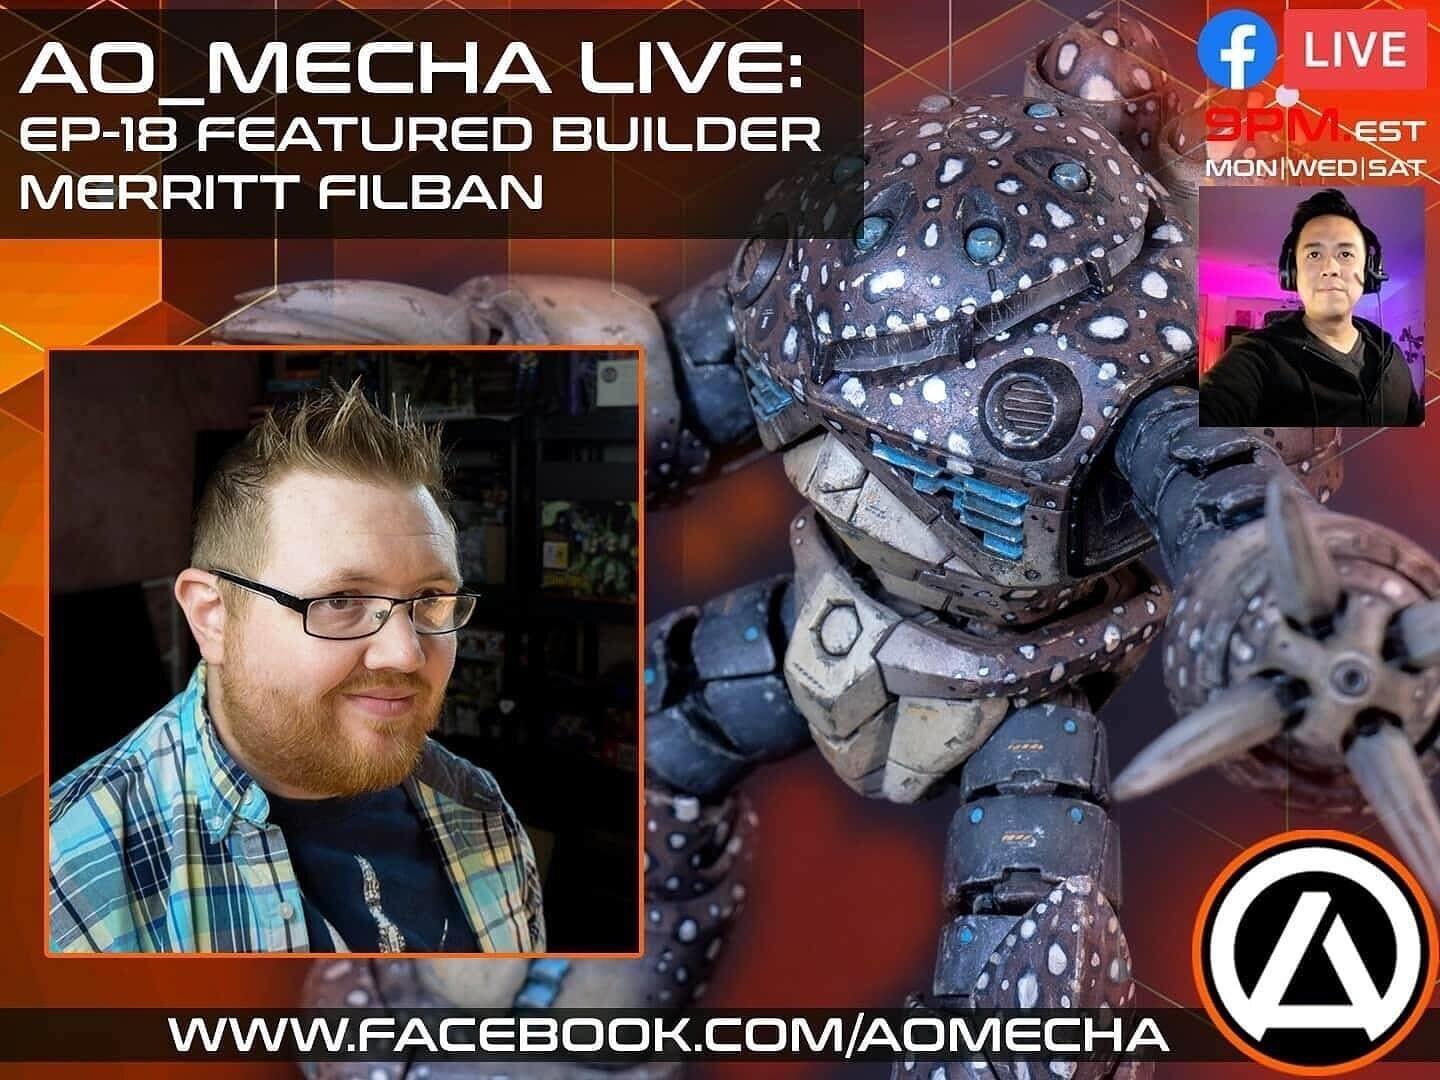 I am going to be the Featured Builder this week on AO_Mecha Live!  Check it out Saturday @ 9pm EST on FB and YT! 

www.facebook.com/aomecha
www.youtube.com/aomecha

#gunpla #gunplabuilders #gunplacustom #gundam #gundambuilder #gundamstagram #gundam_i